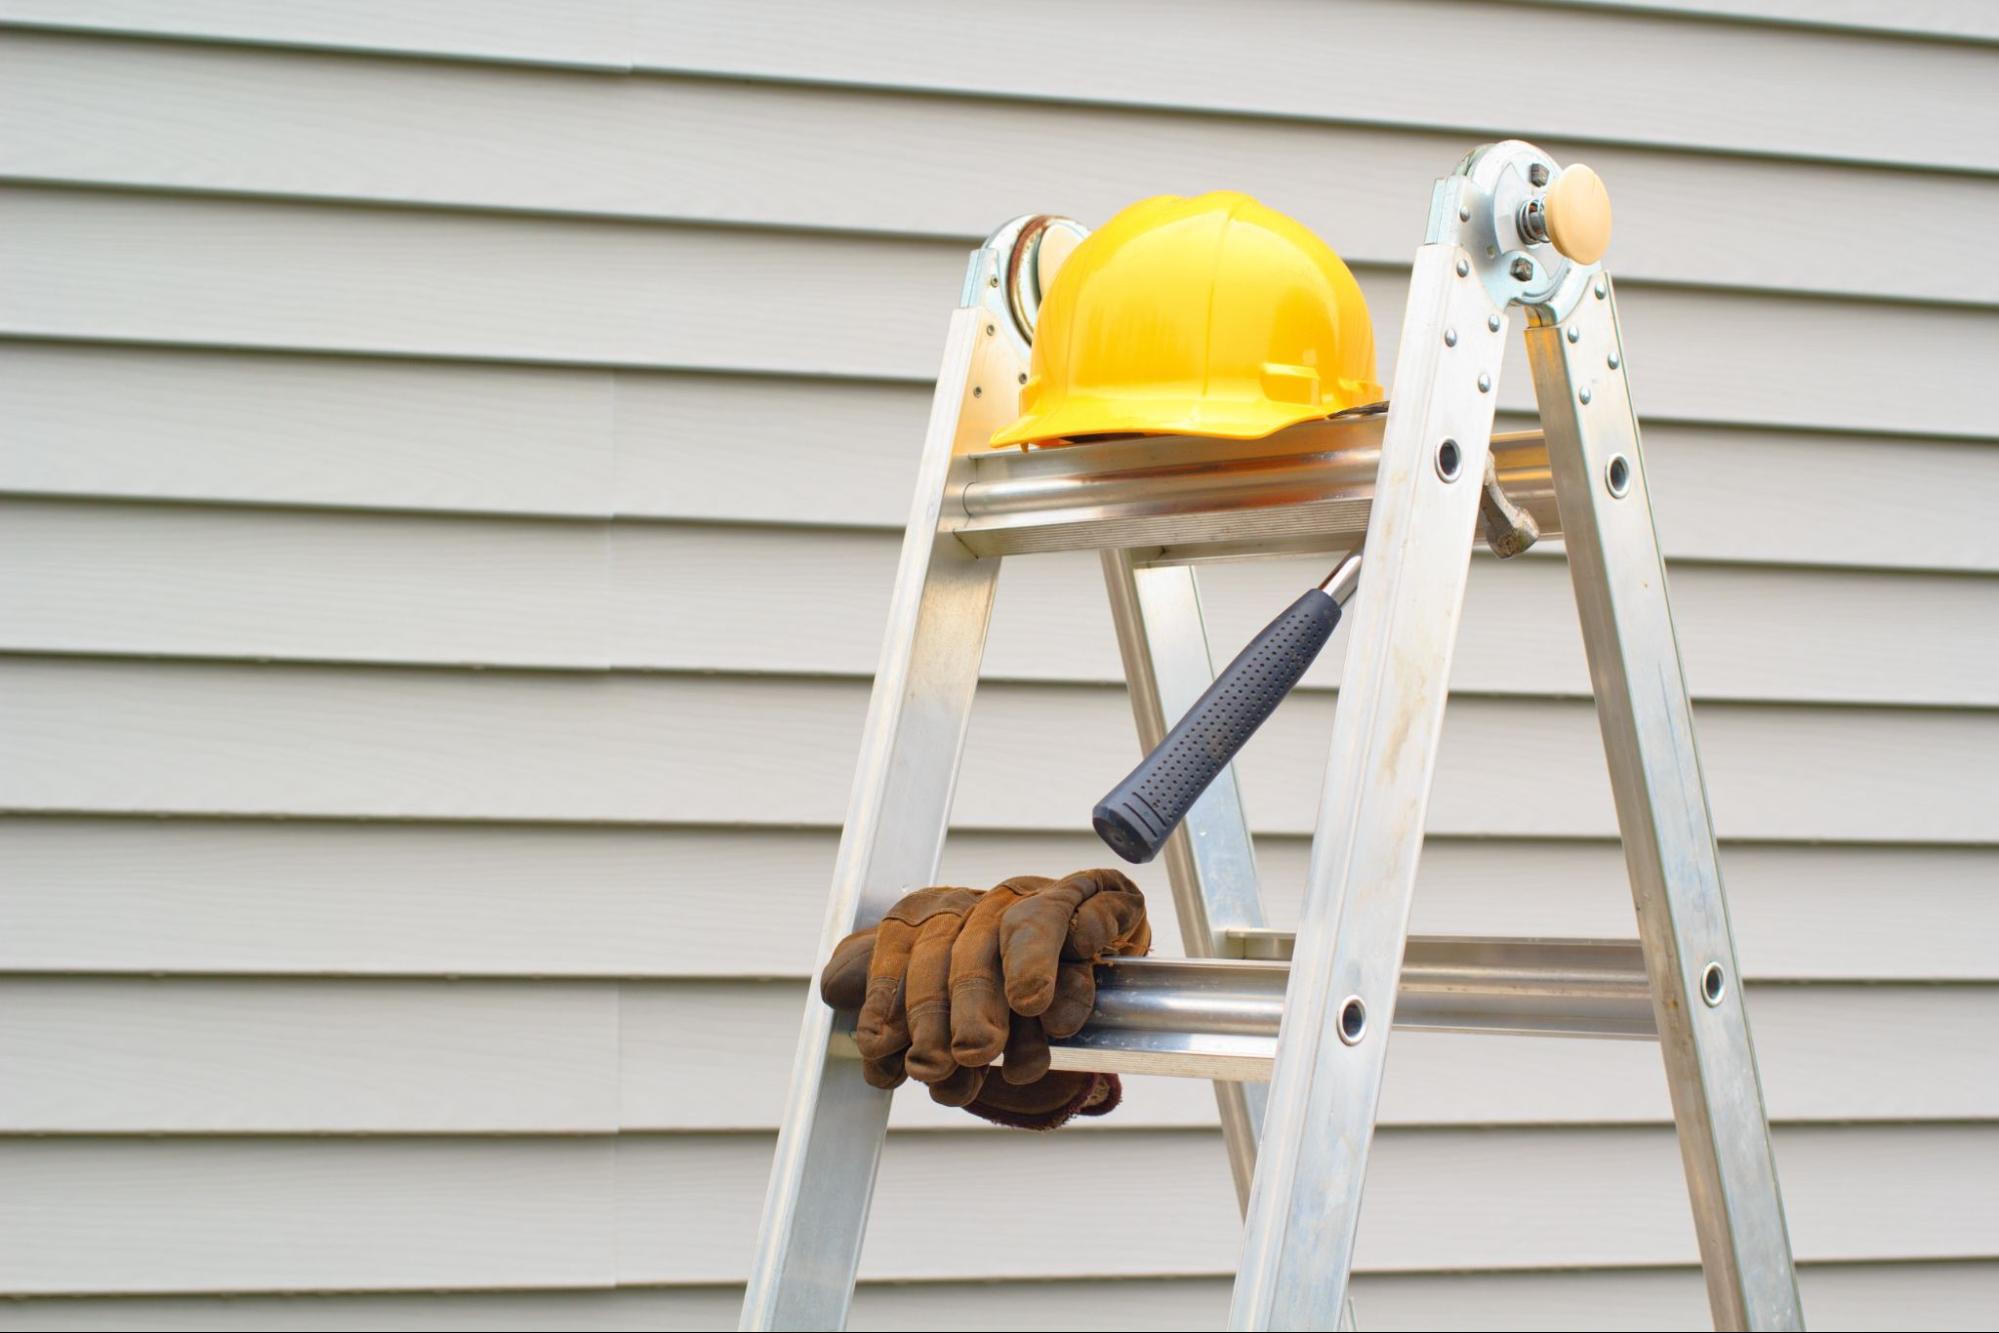 professional gear on ladder siding on background